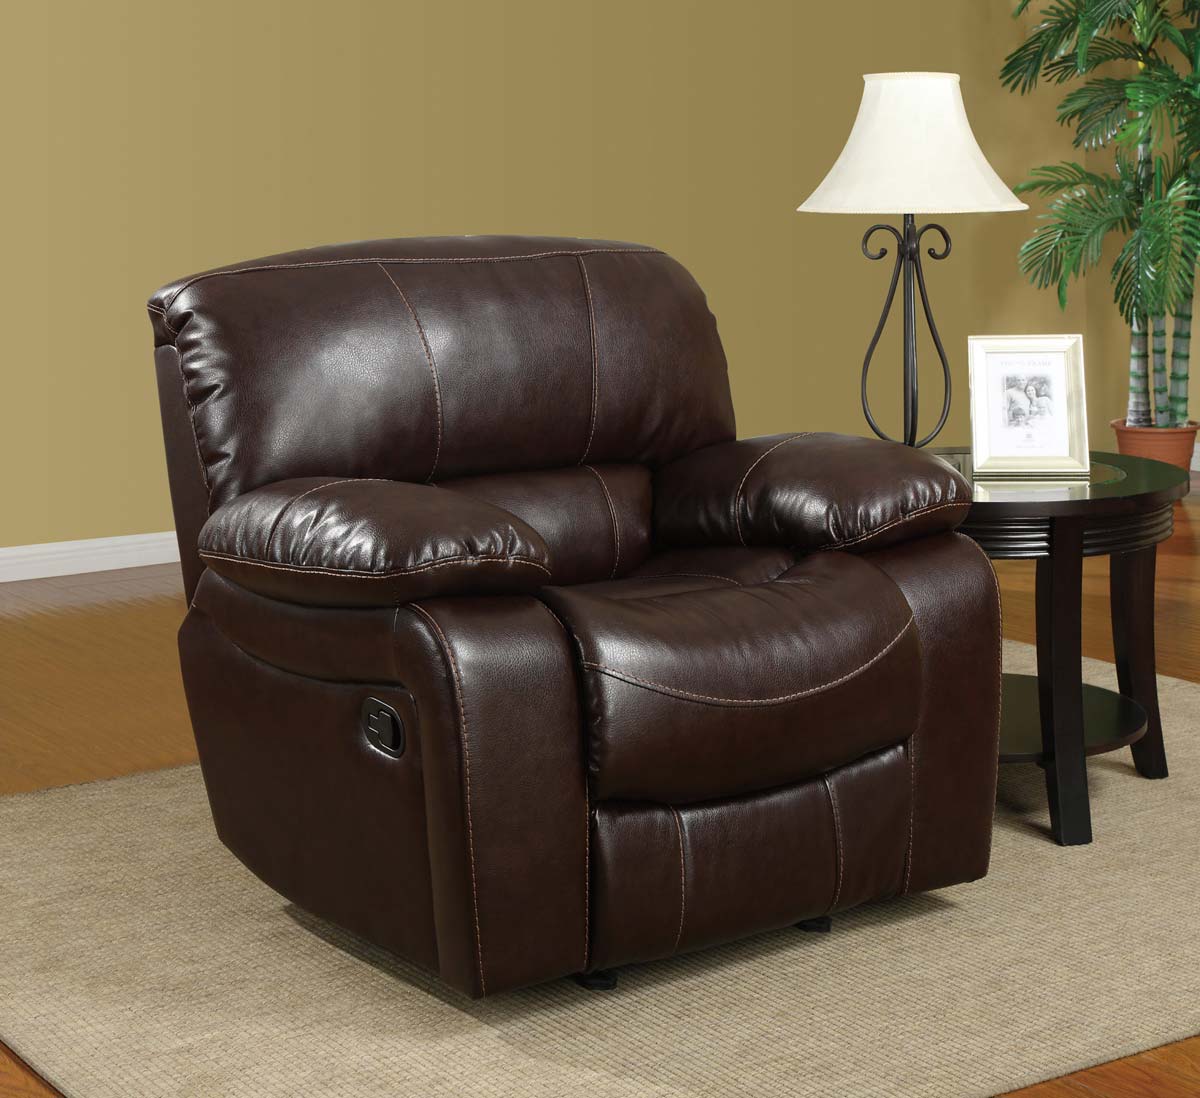 Global Furniture USA 8122 Glider Recliner Chair - Bonded Leather - Burgundy